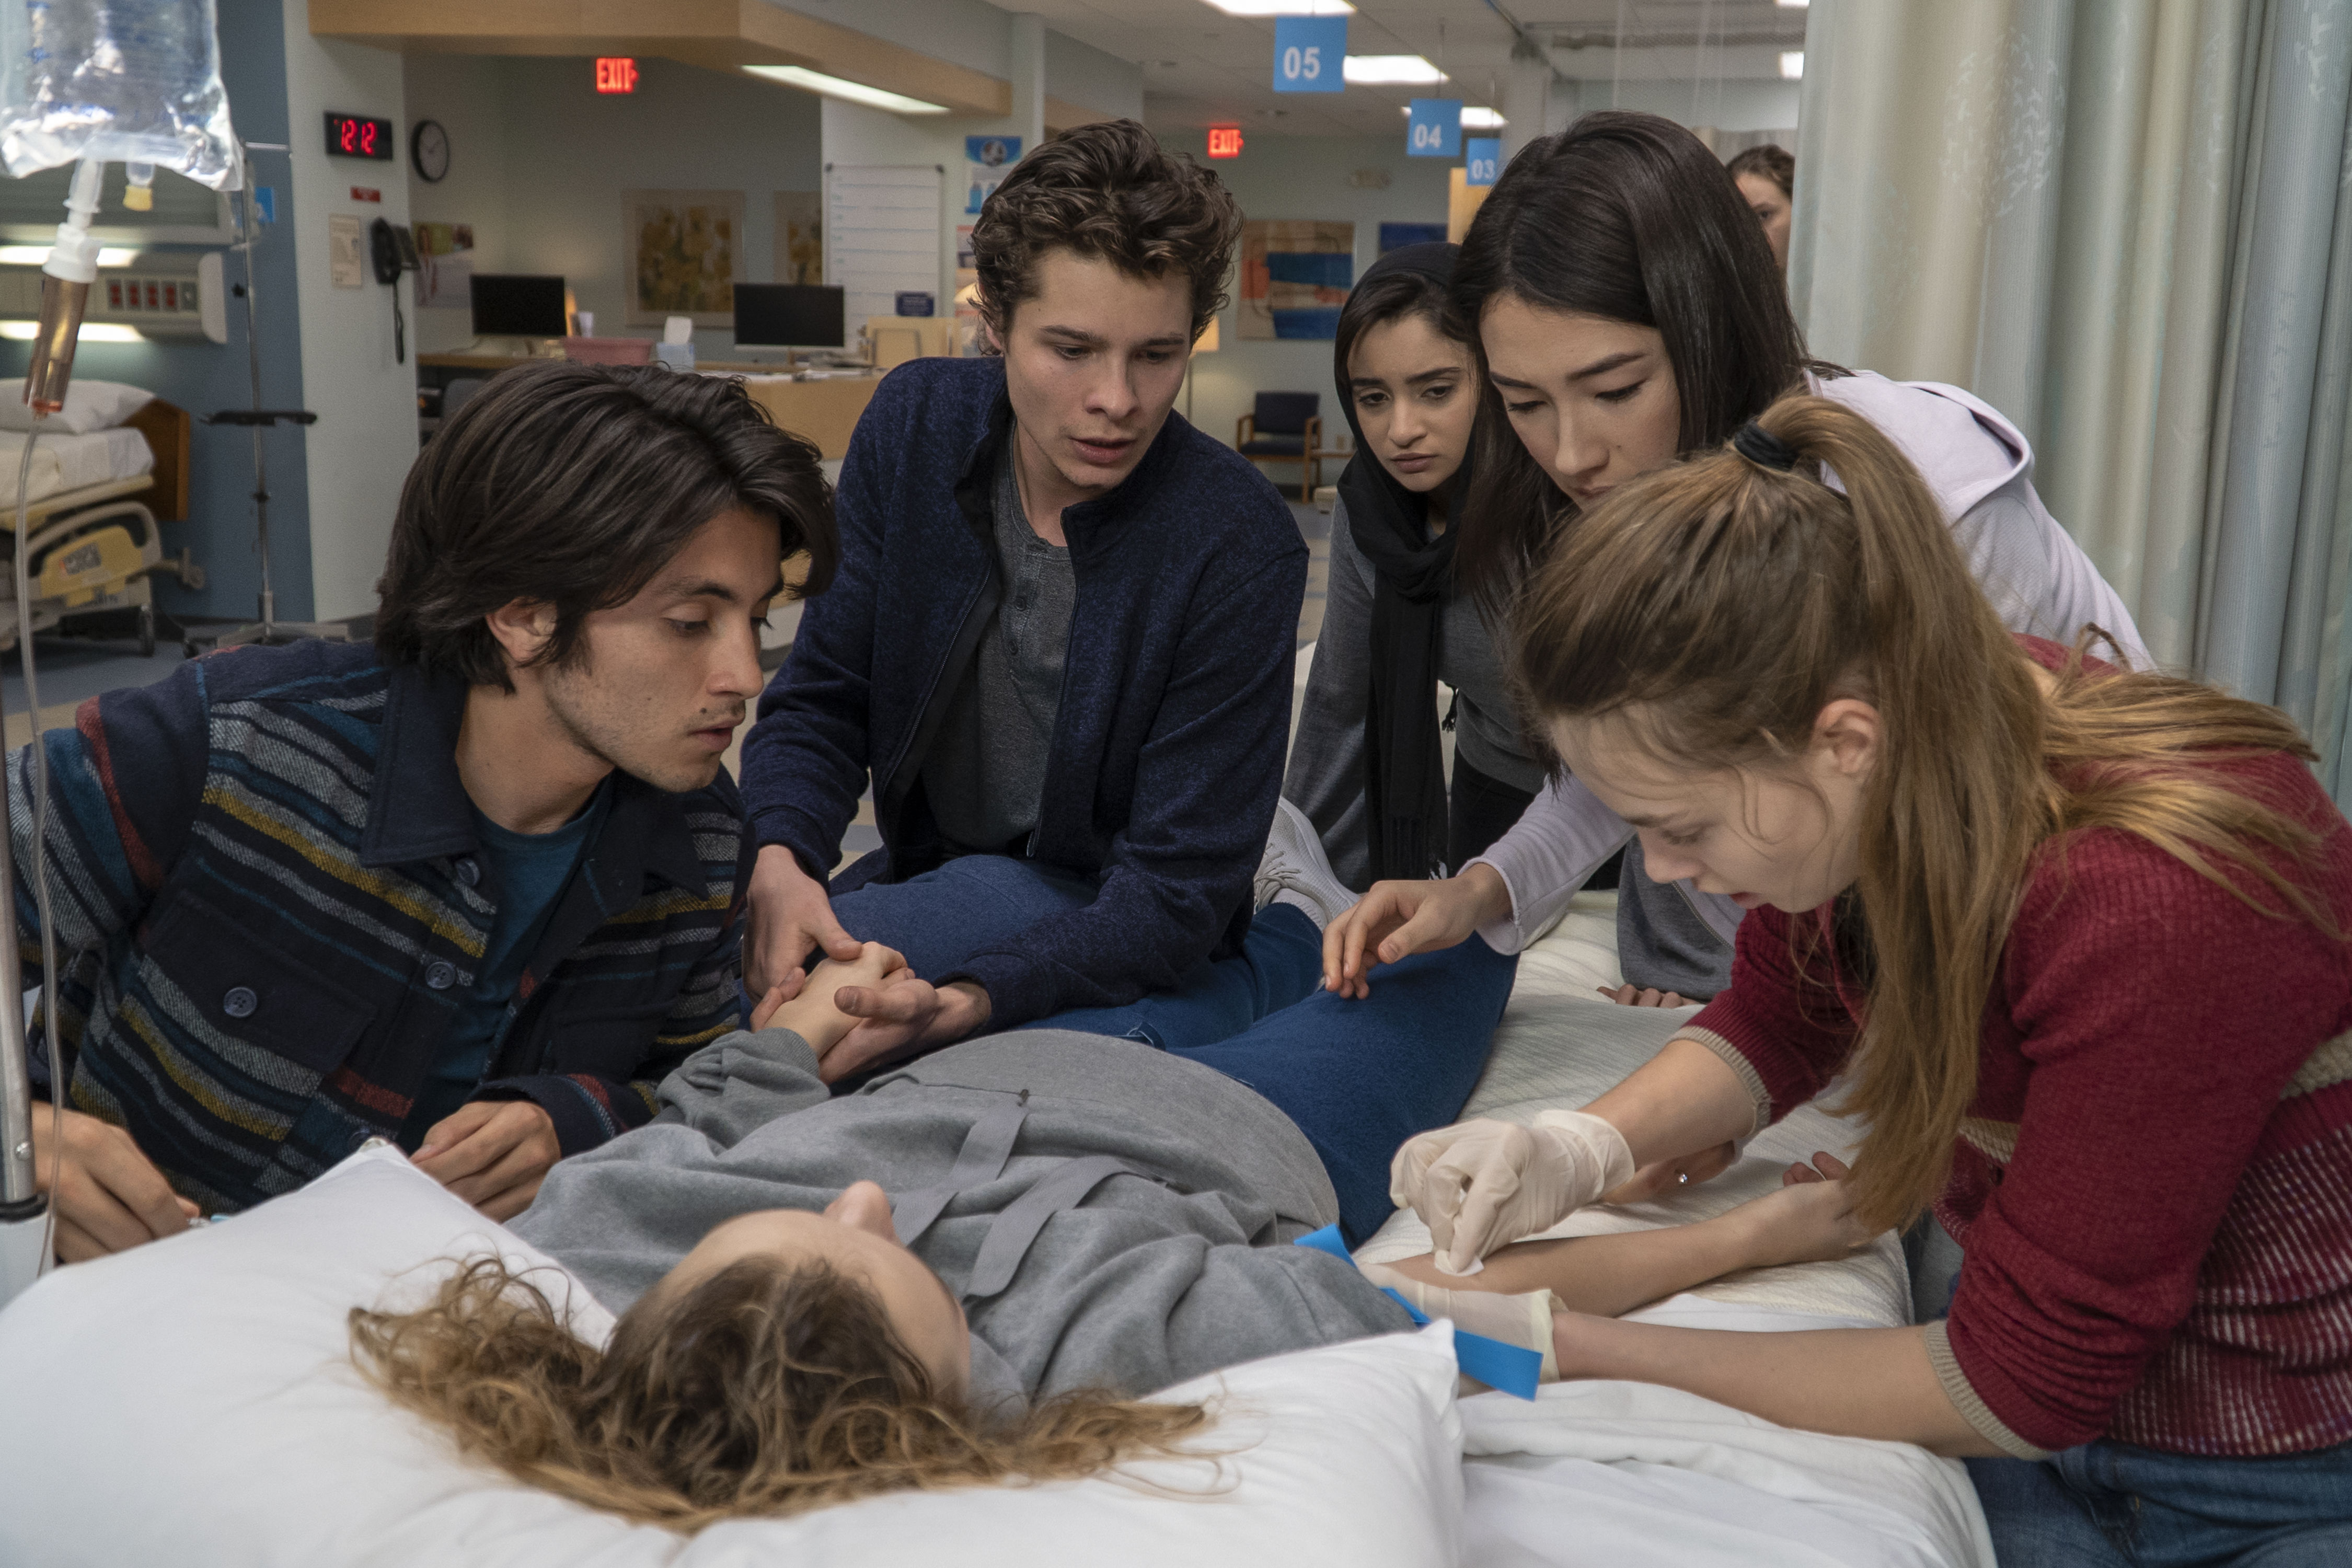 Netflix's The Society is Lord of the Flies for the digital and horror